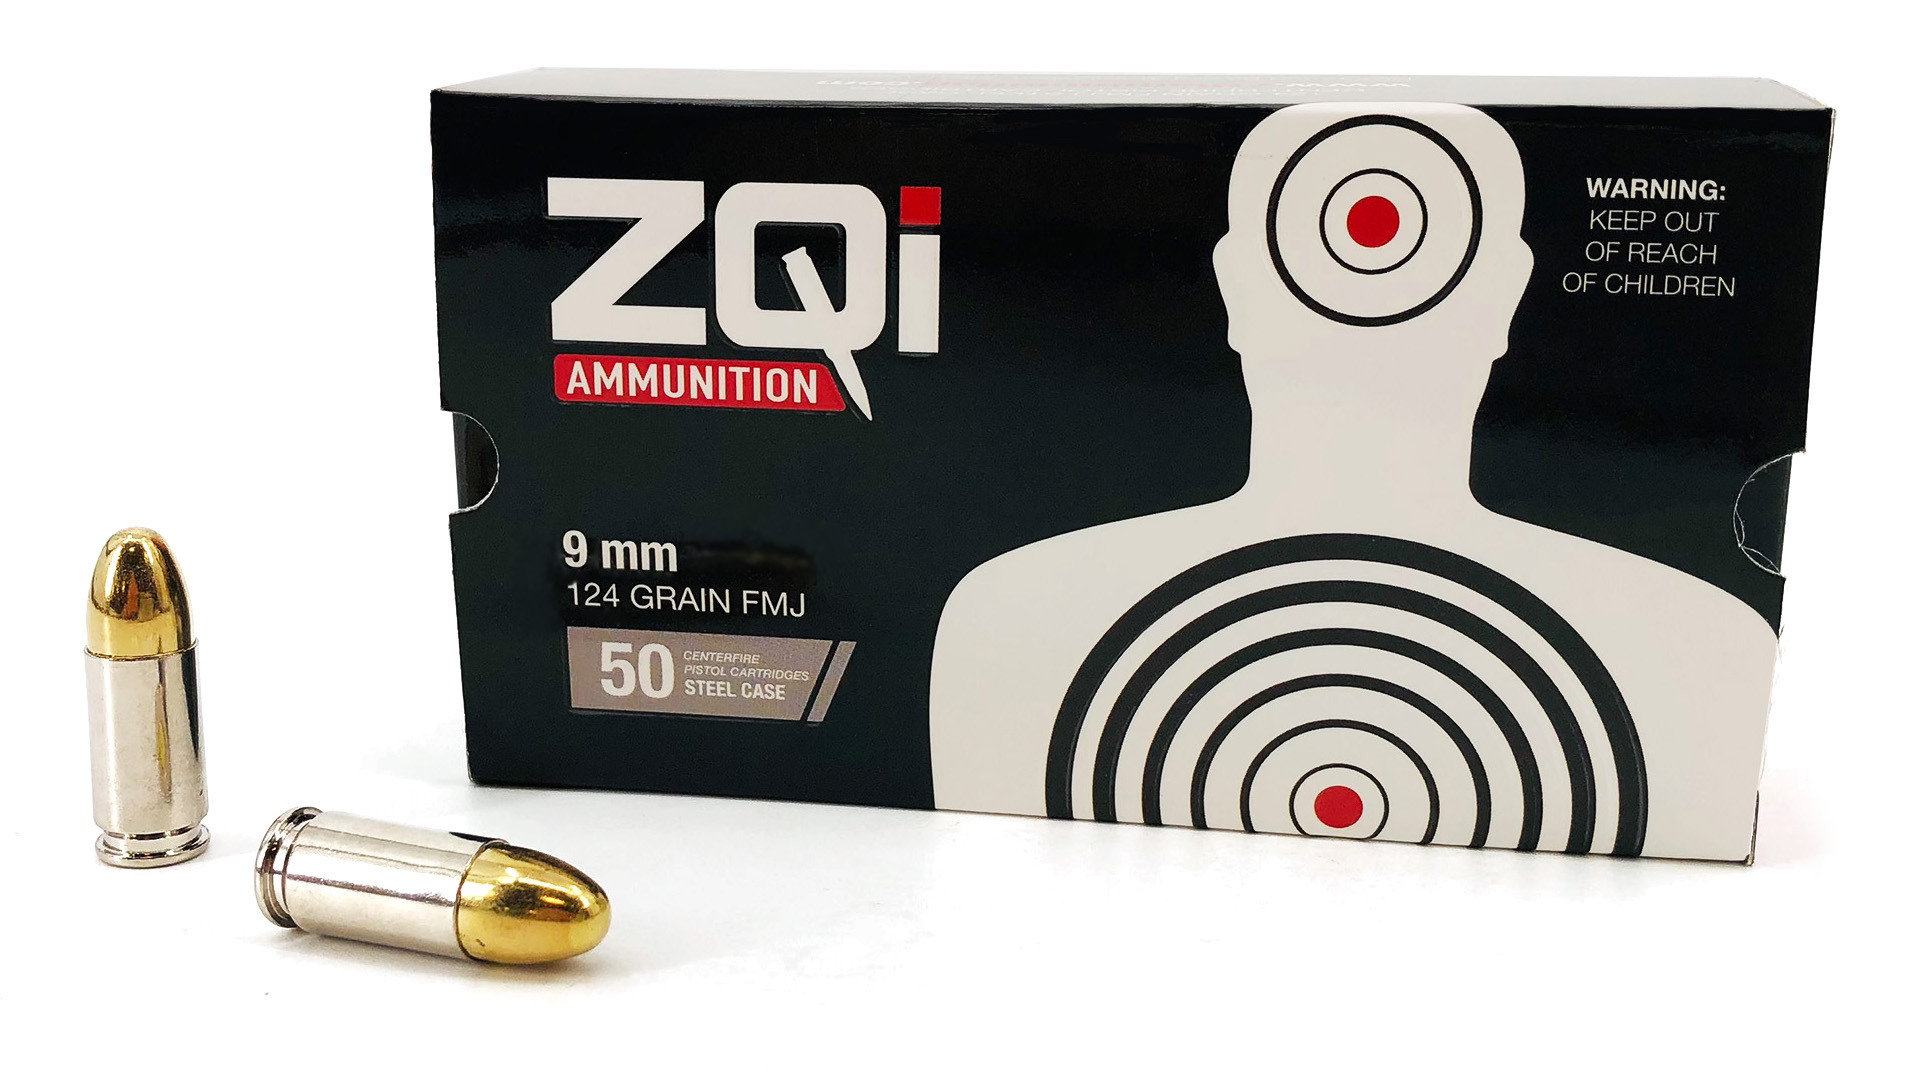 ZQi Ammunition 9mm 124gr. Full-Metal Jacket FMJ Nickel-Plated Steel Cased Centerfire Ammunition | Up to 38% Off 4 Star Rating Free Shipping over $49!